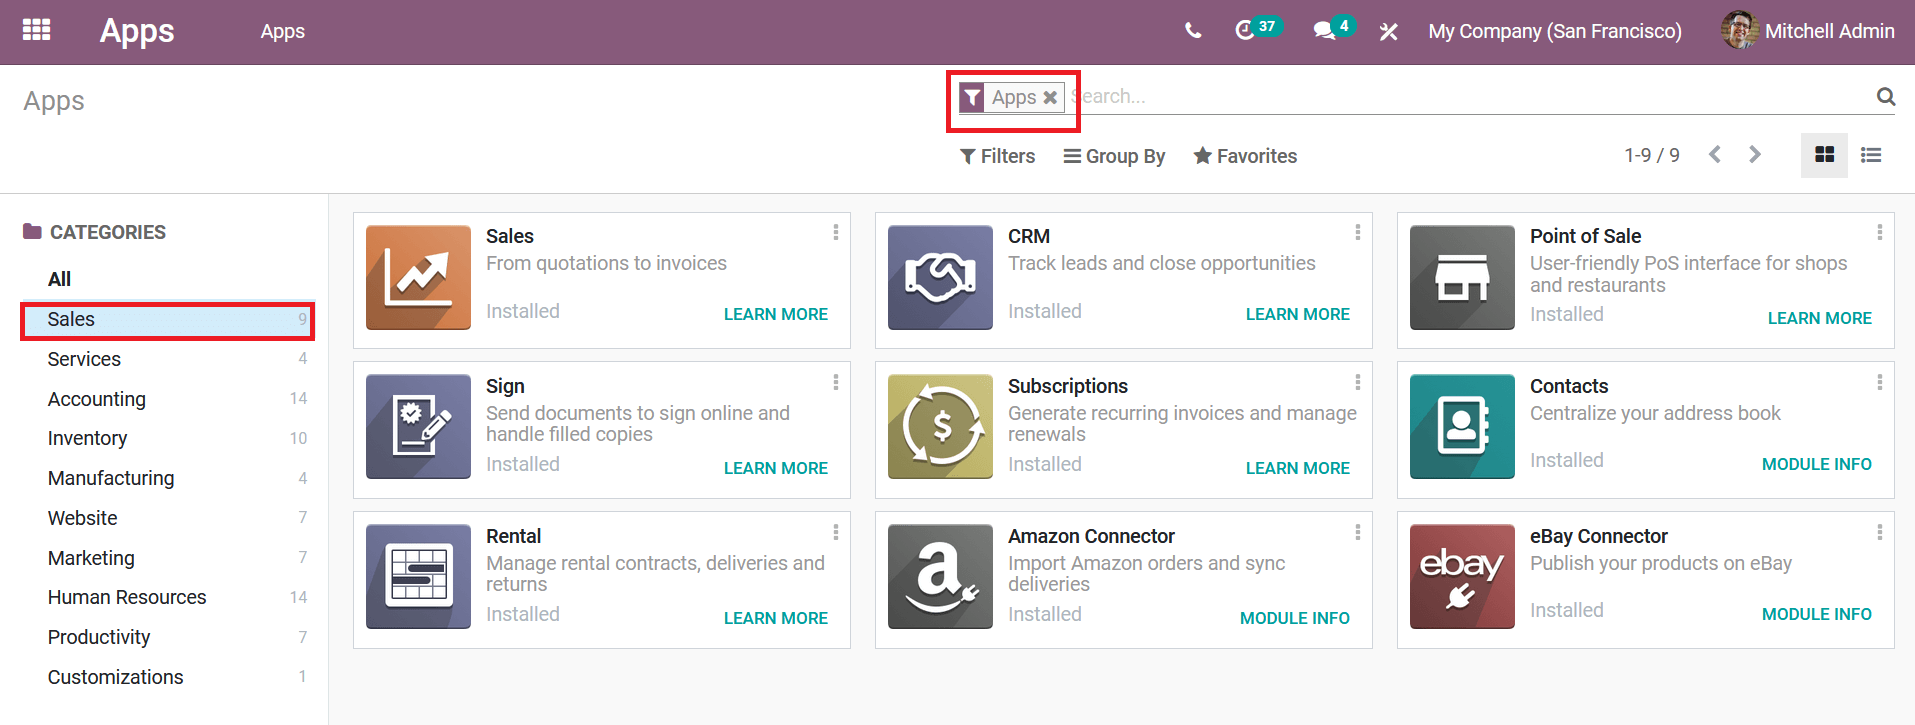 sa-complete-guide-to-odoo-modules